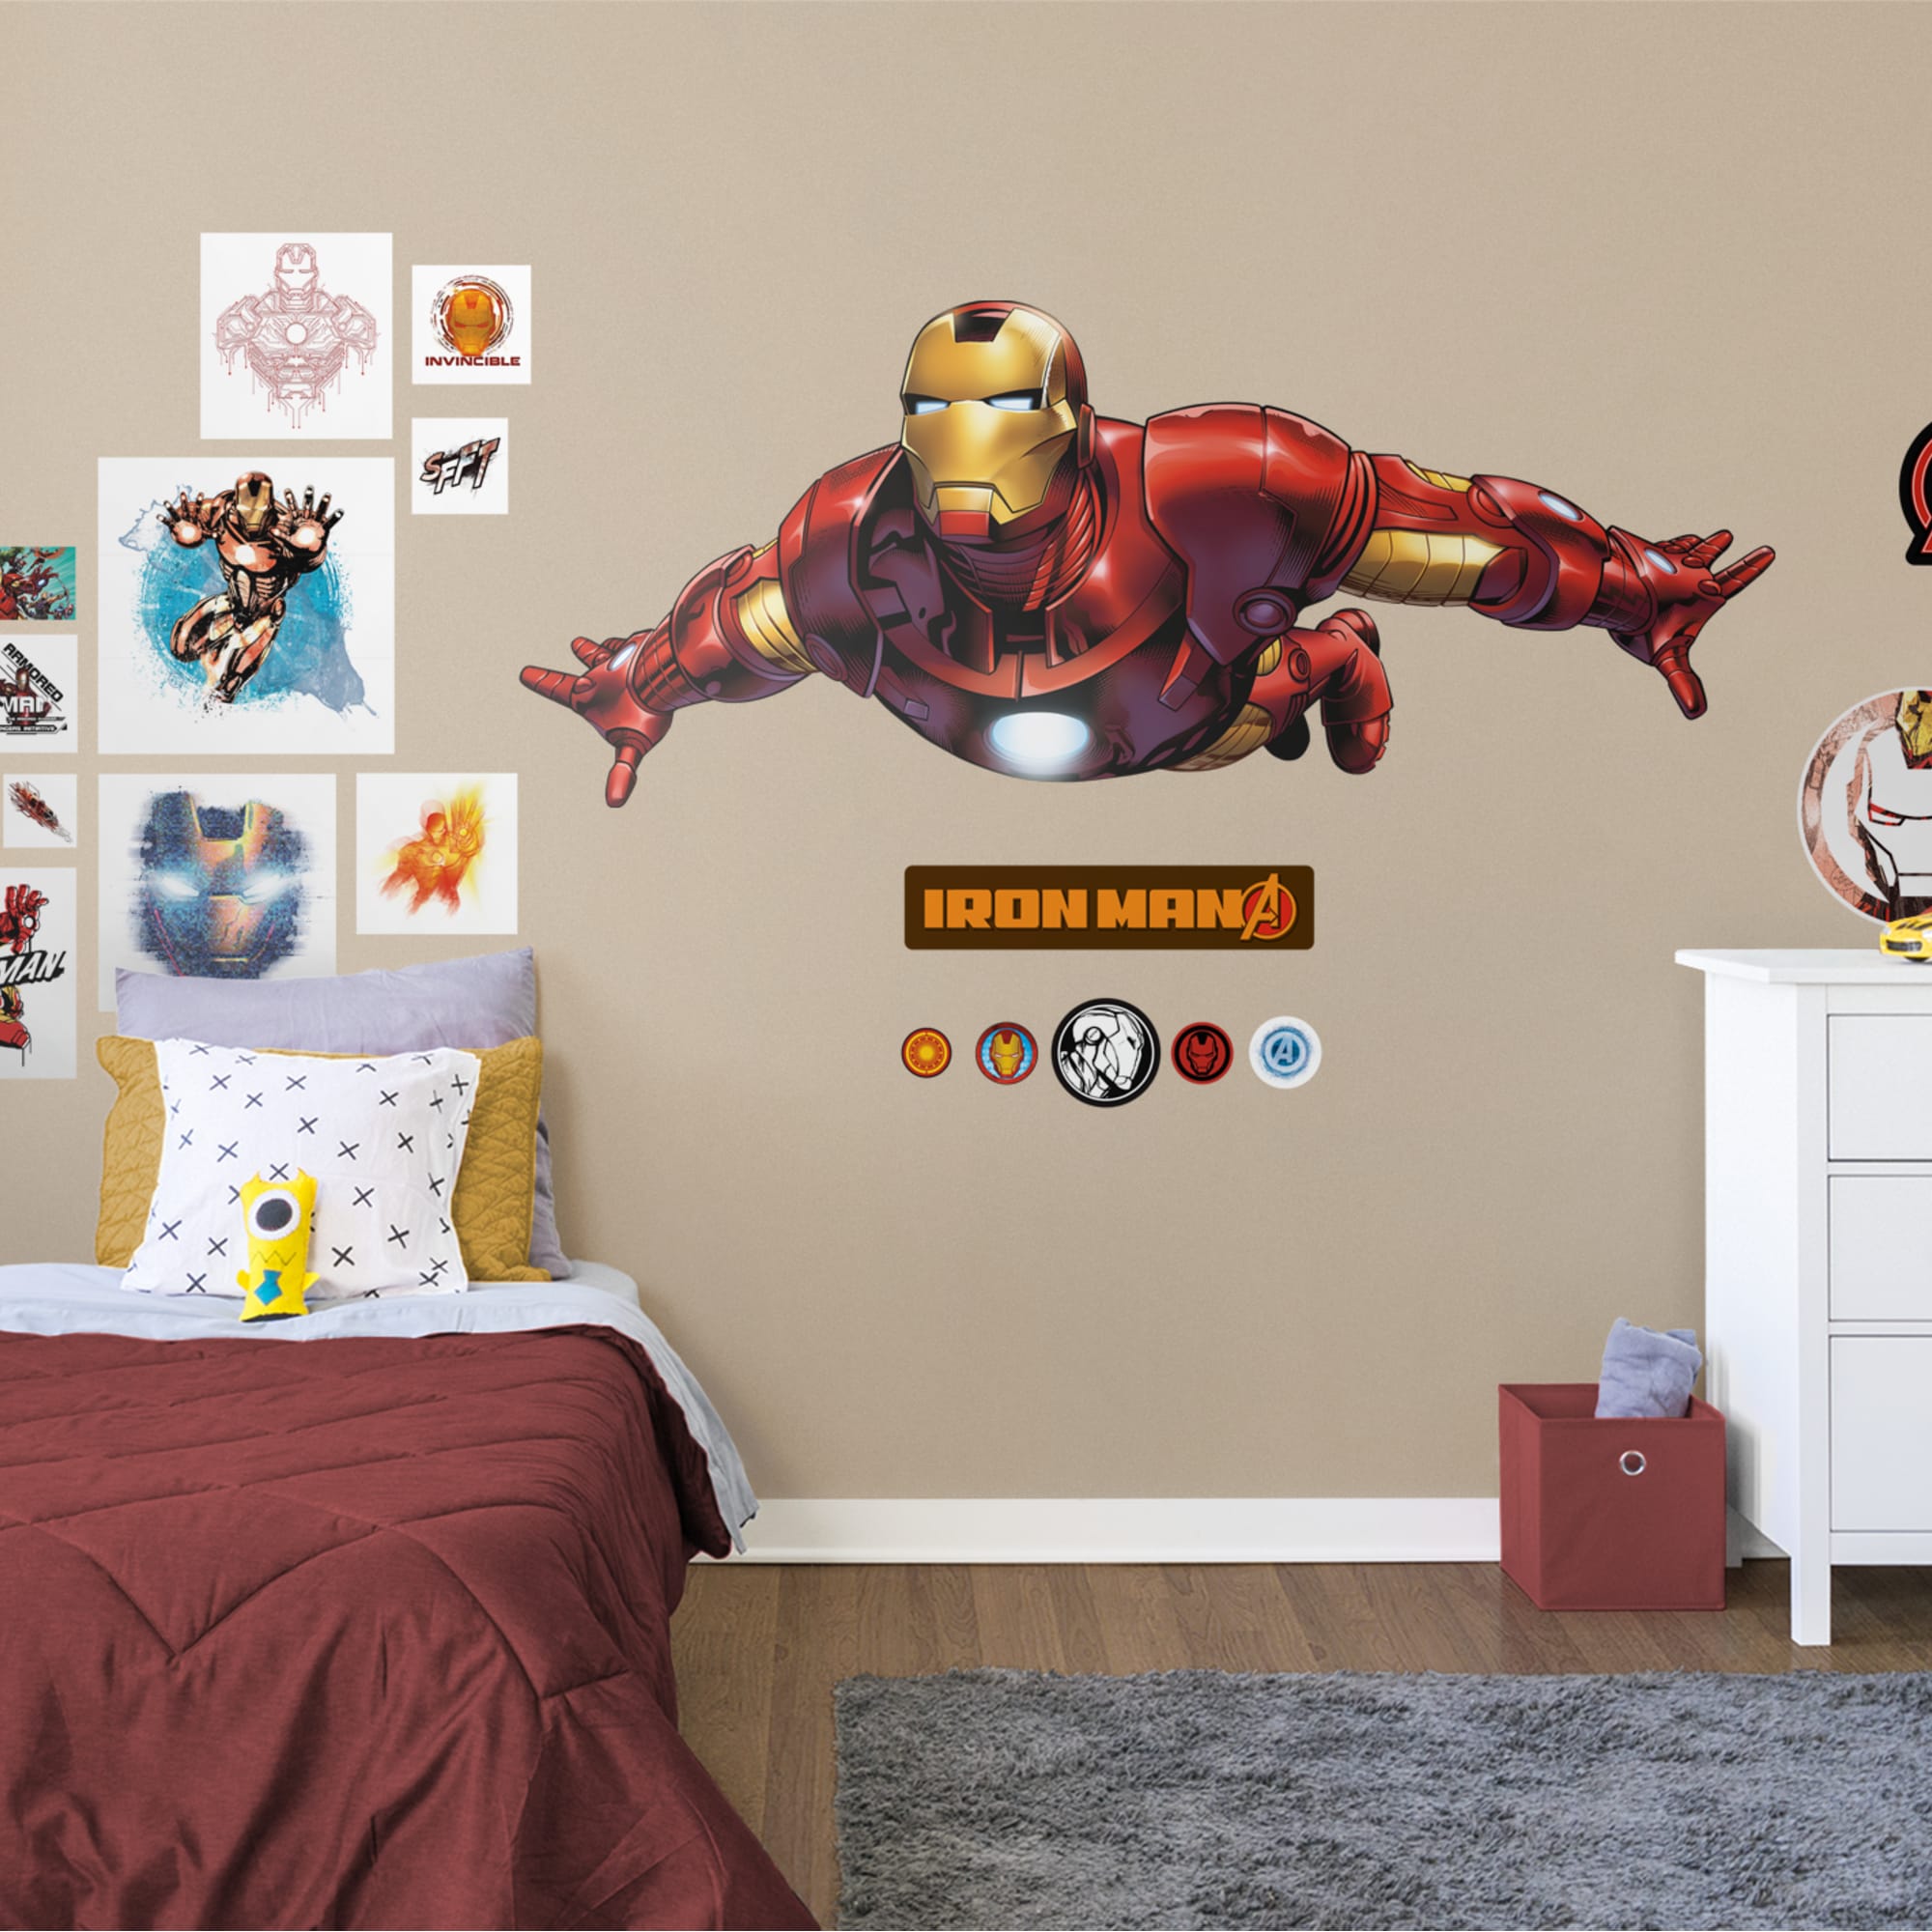 Iron Man: Flying - Officially Licensed Removable Wall Decal Life-Size Character + 17 Decals (78"W x 32"H) by Fathead | Vinyl